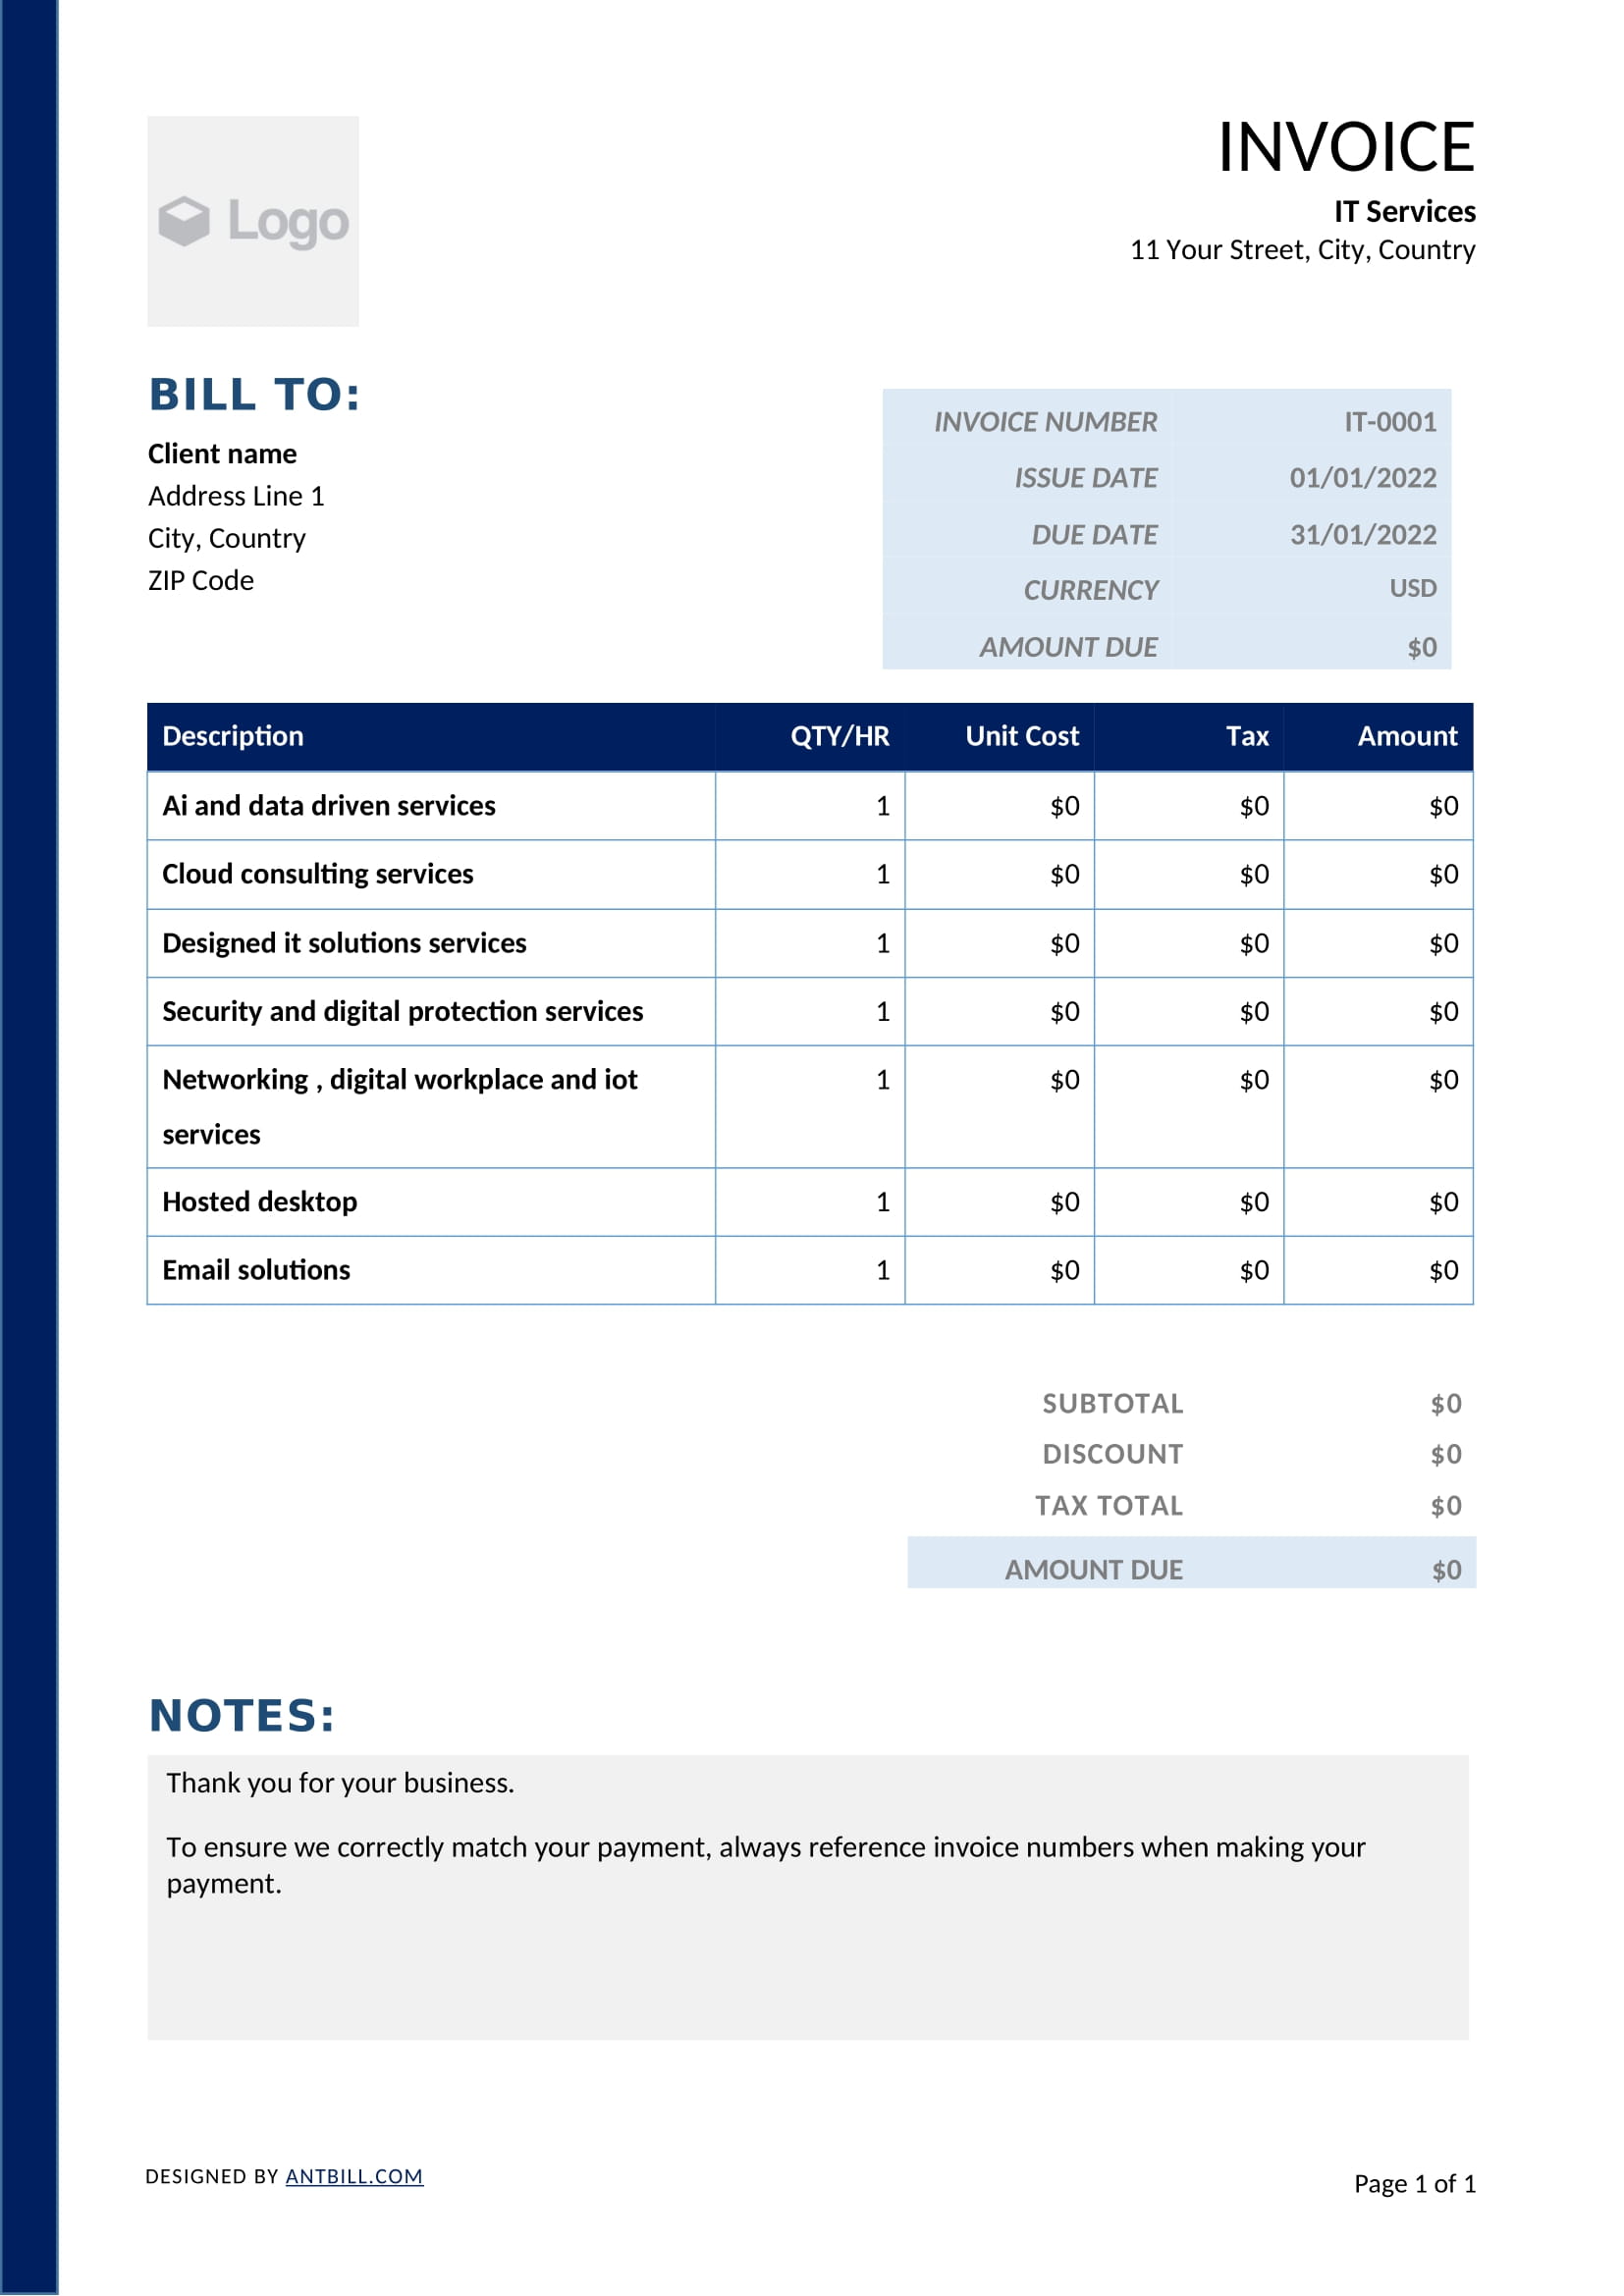 IT Services Invoice Template - professional